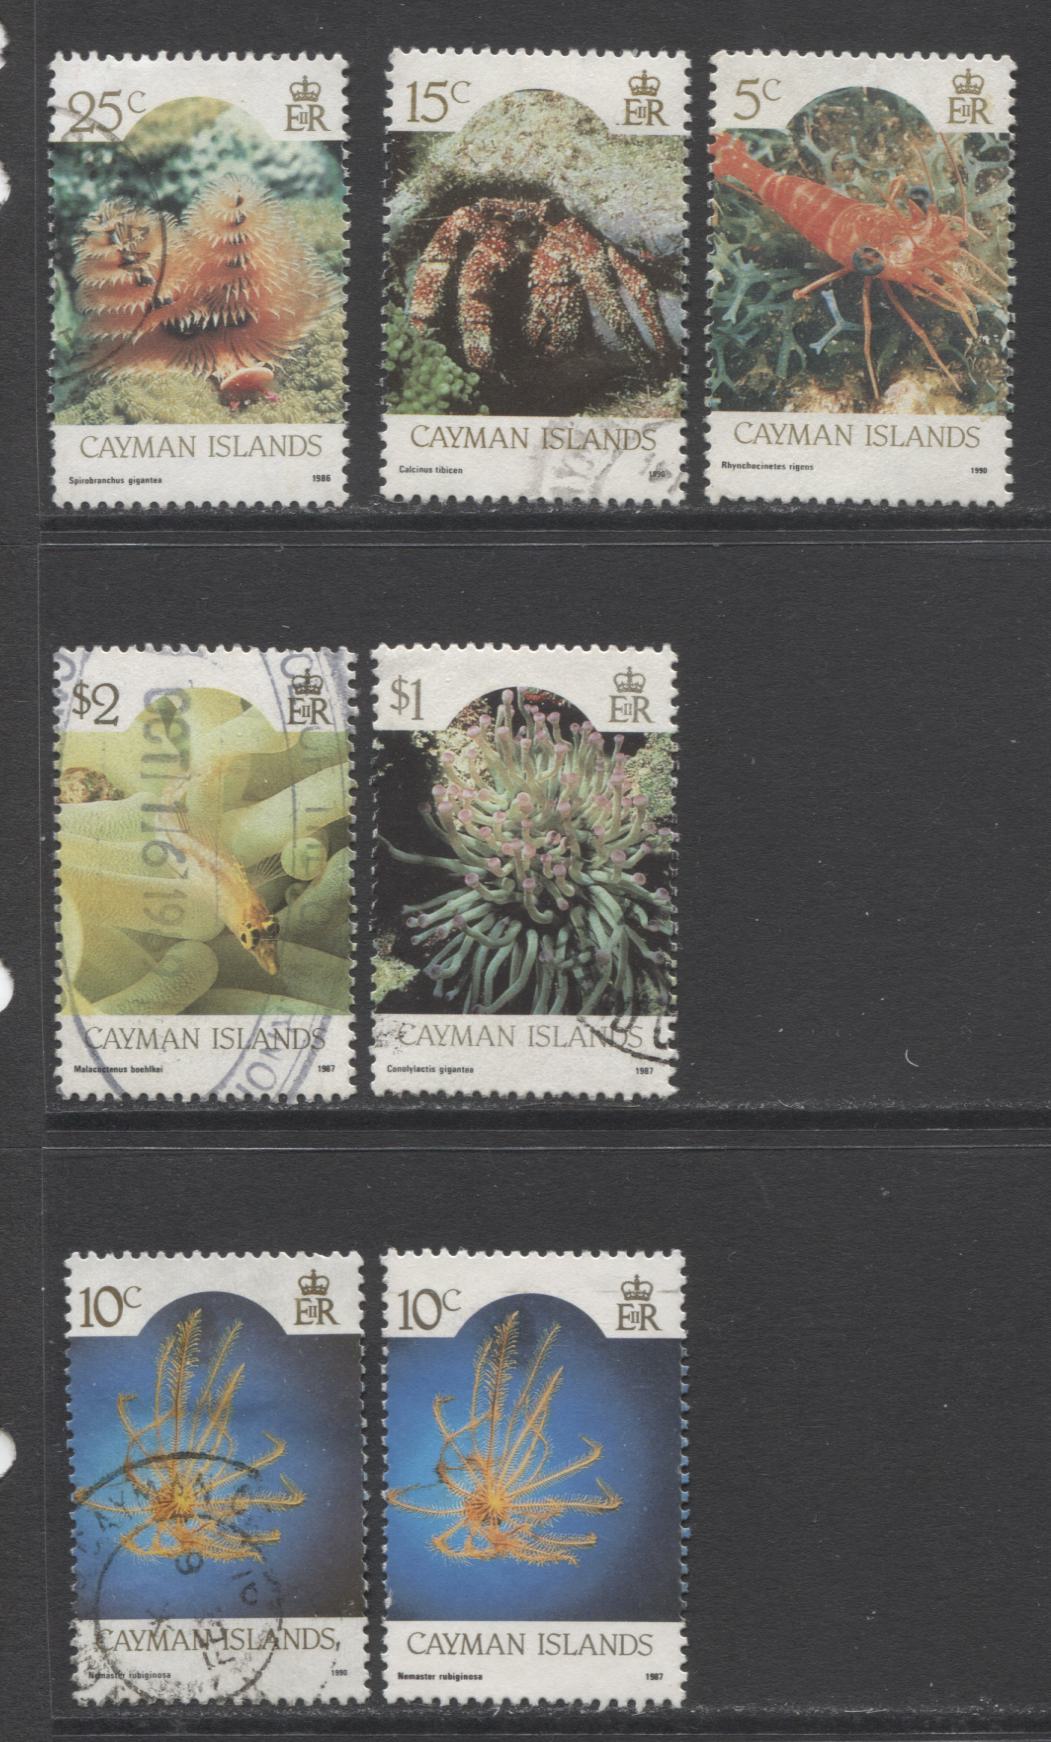 Lot 46 Cayman Islands SC#563a/572a 1986-1990 Marine Life Definitives, A VF Used Range Of Better Singles, 2017 Scott Cat. $35.25 USD, Click on Listing to See ALL Pictures